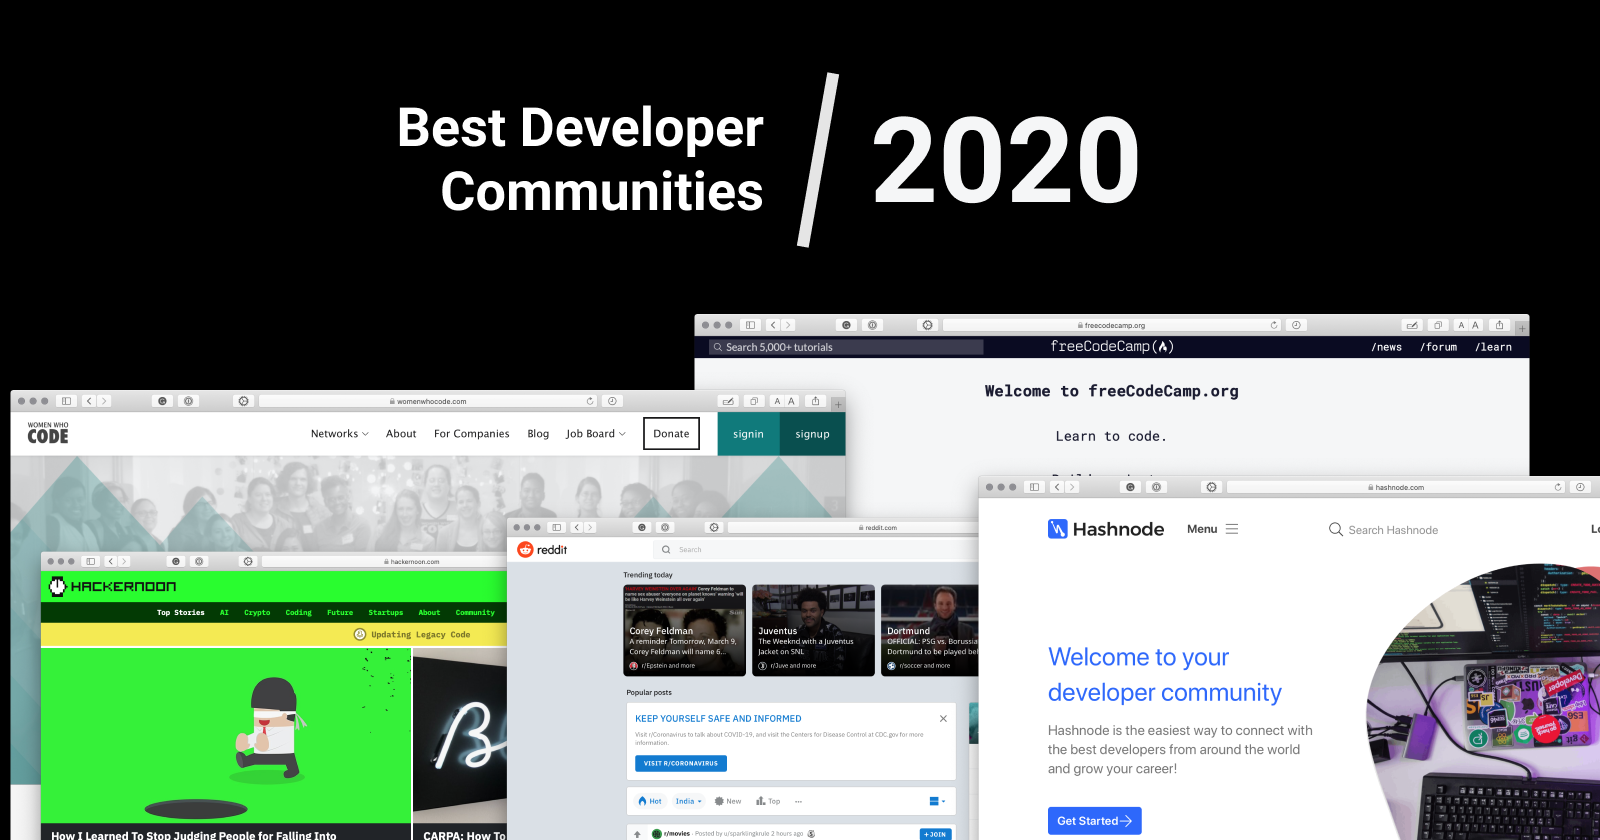 The Best Developer Communities to Join in 2020